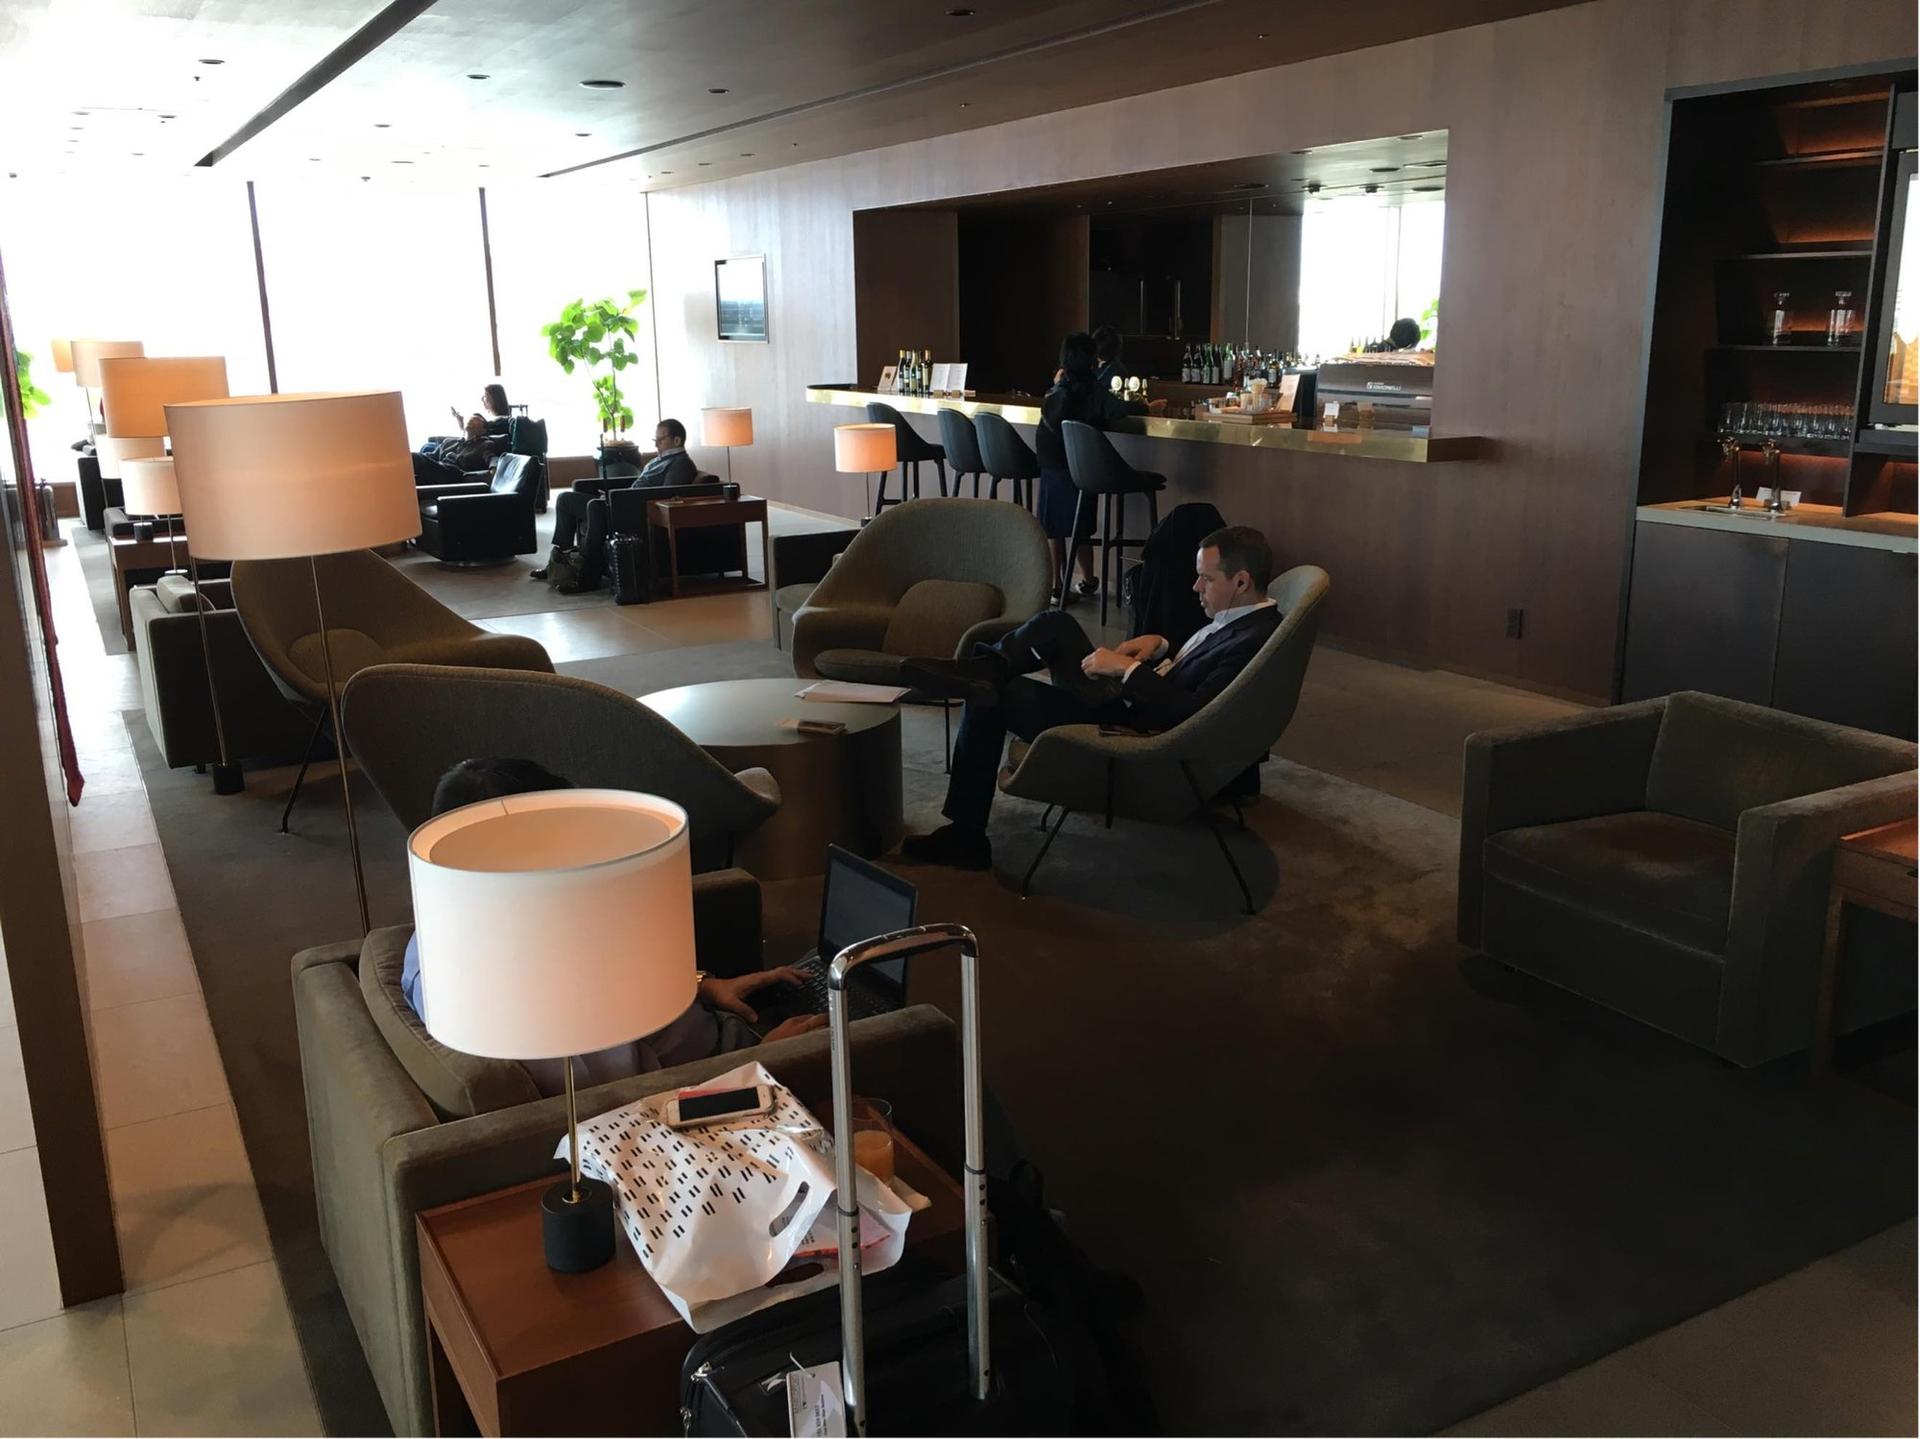 Cathay Pacific Lounge image 49 of 49